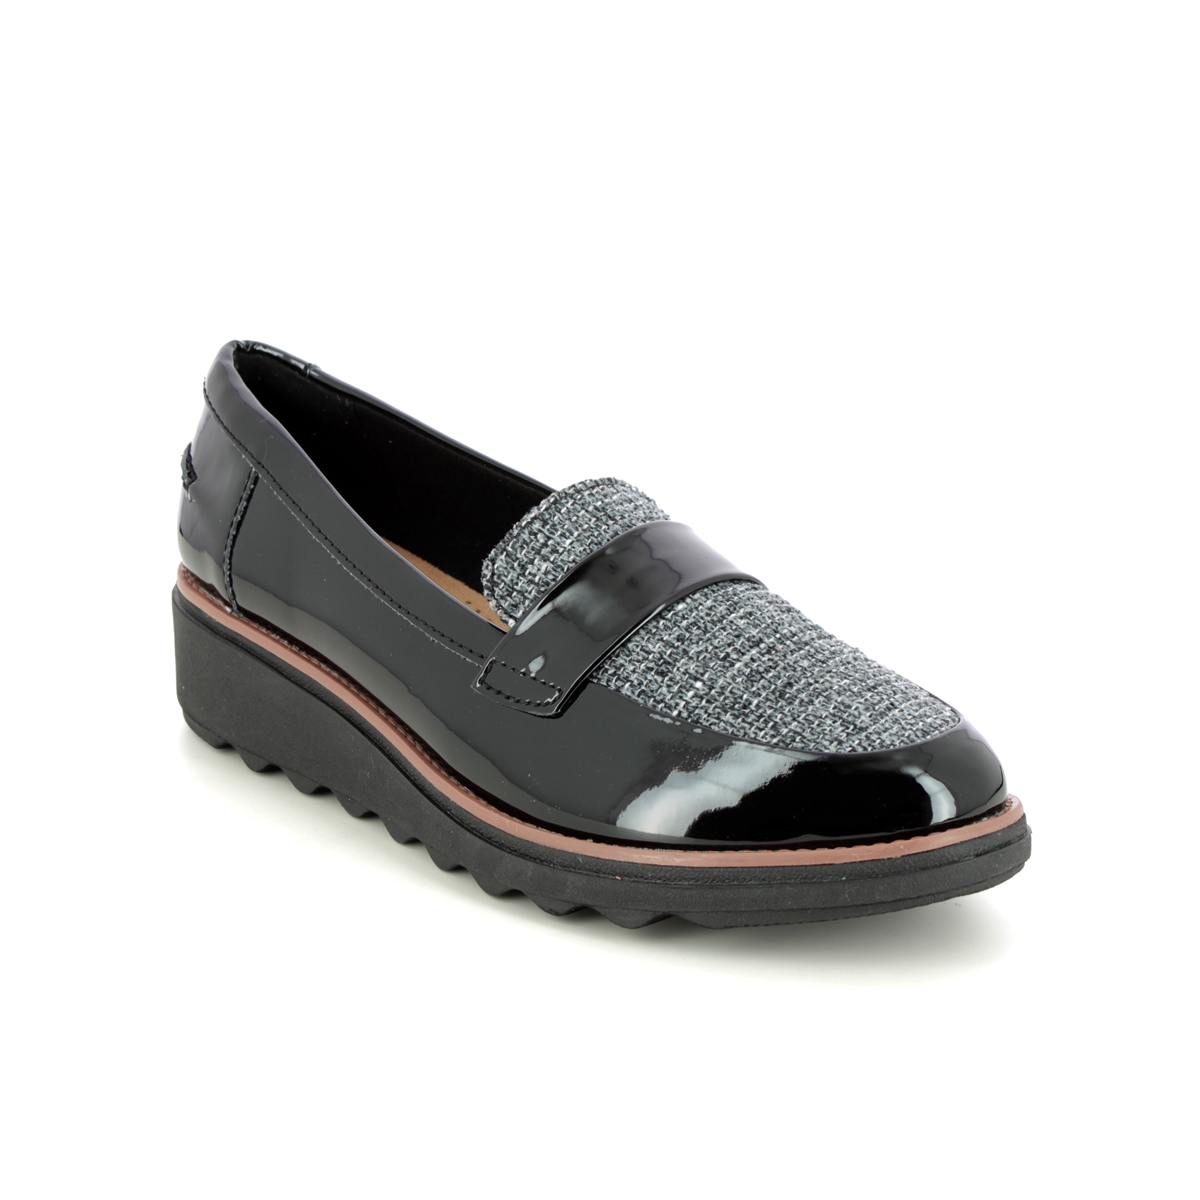 Clarks Sharon Gracie Black patent Womens loafers 6408-24D in a Plain Leather in Size 4